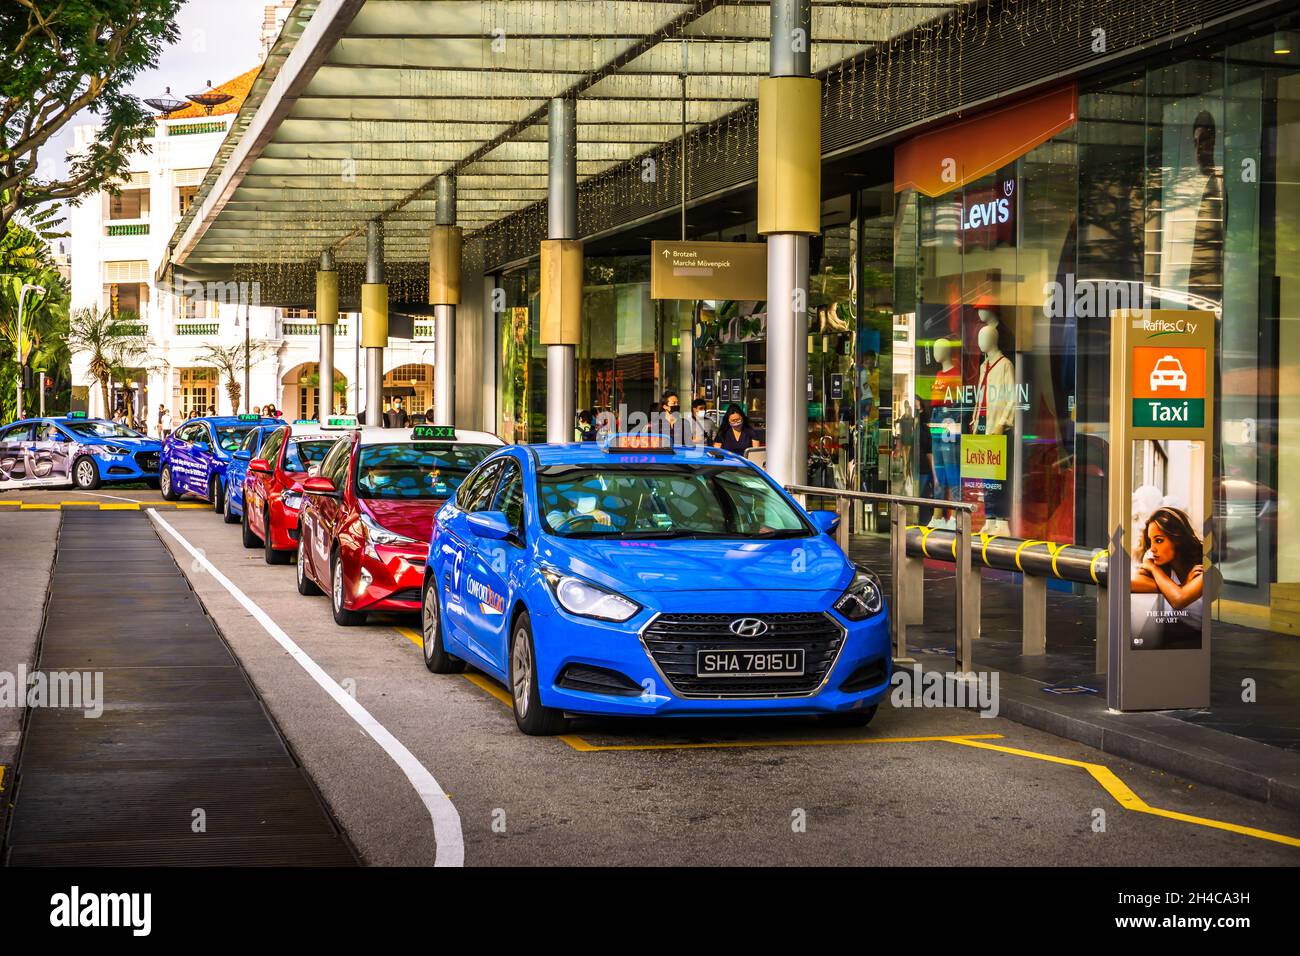 Taxi queuing up along the road leading to Taxi stand at Raffles City Stock  Photo - Alamy